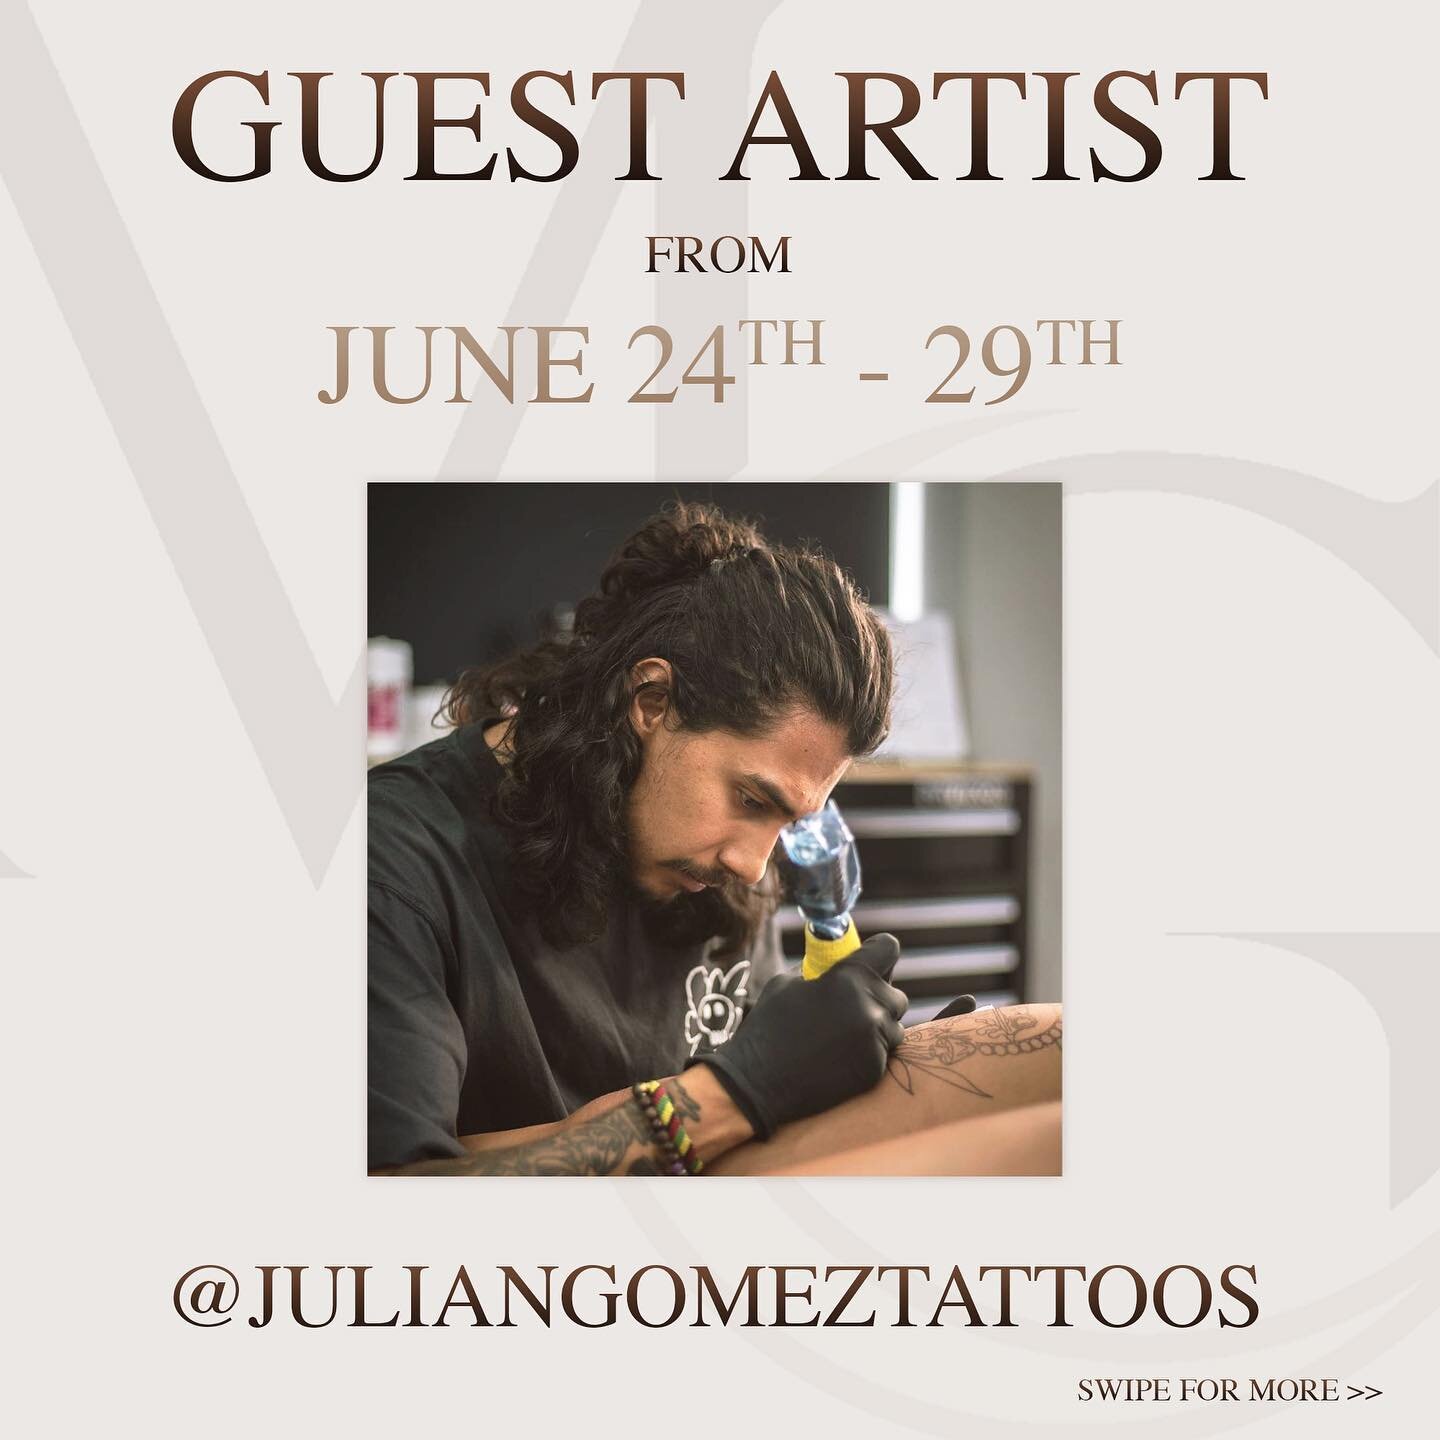 Guest Artist Alert 🚨 

We are pleased to announce @juliangomeztattoos will be doing a guest spot in @moonlightgalleryny from June 24th-29th! Send him an email to book an appointment before all spots are taken! 

✉️ Juliangomeztattoos@gmail.com

#lon